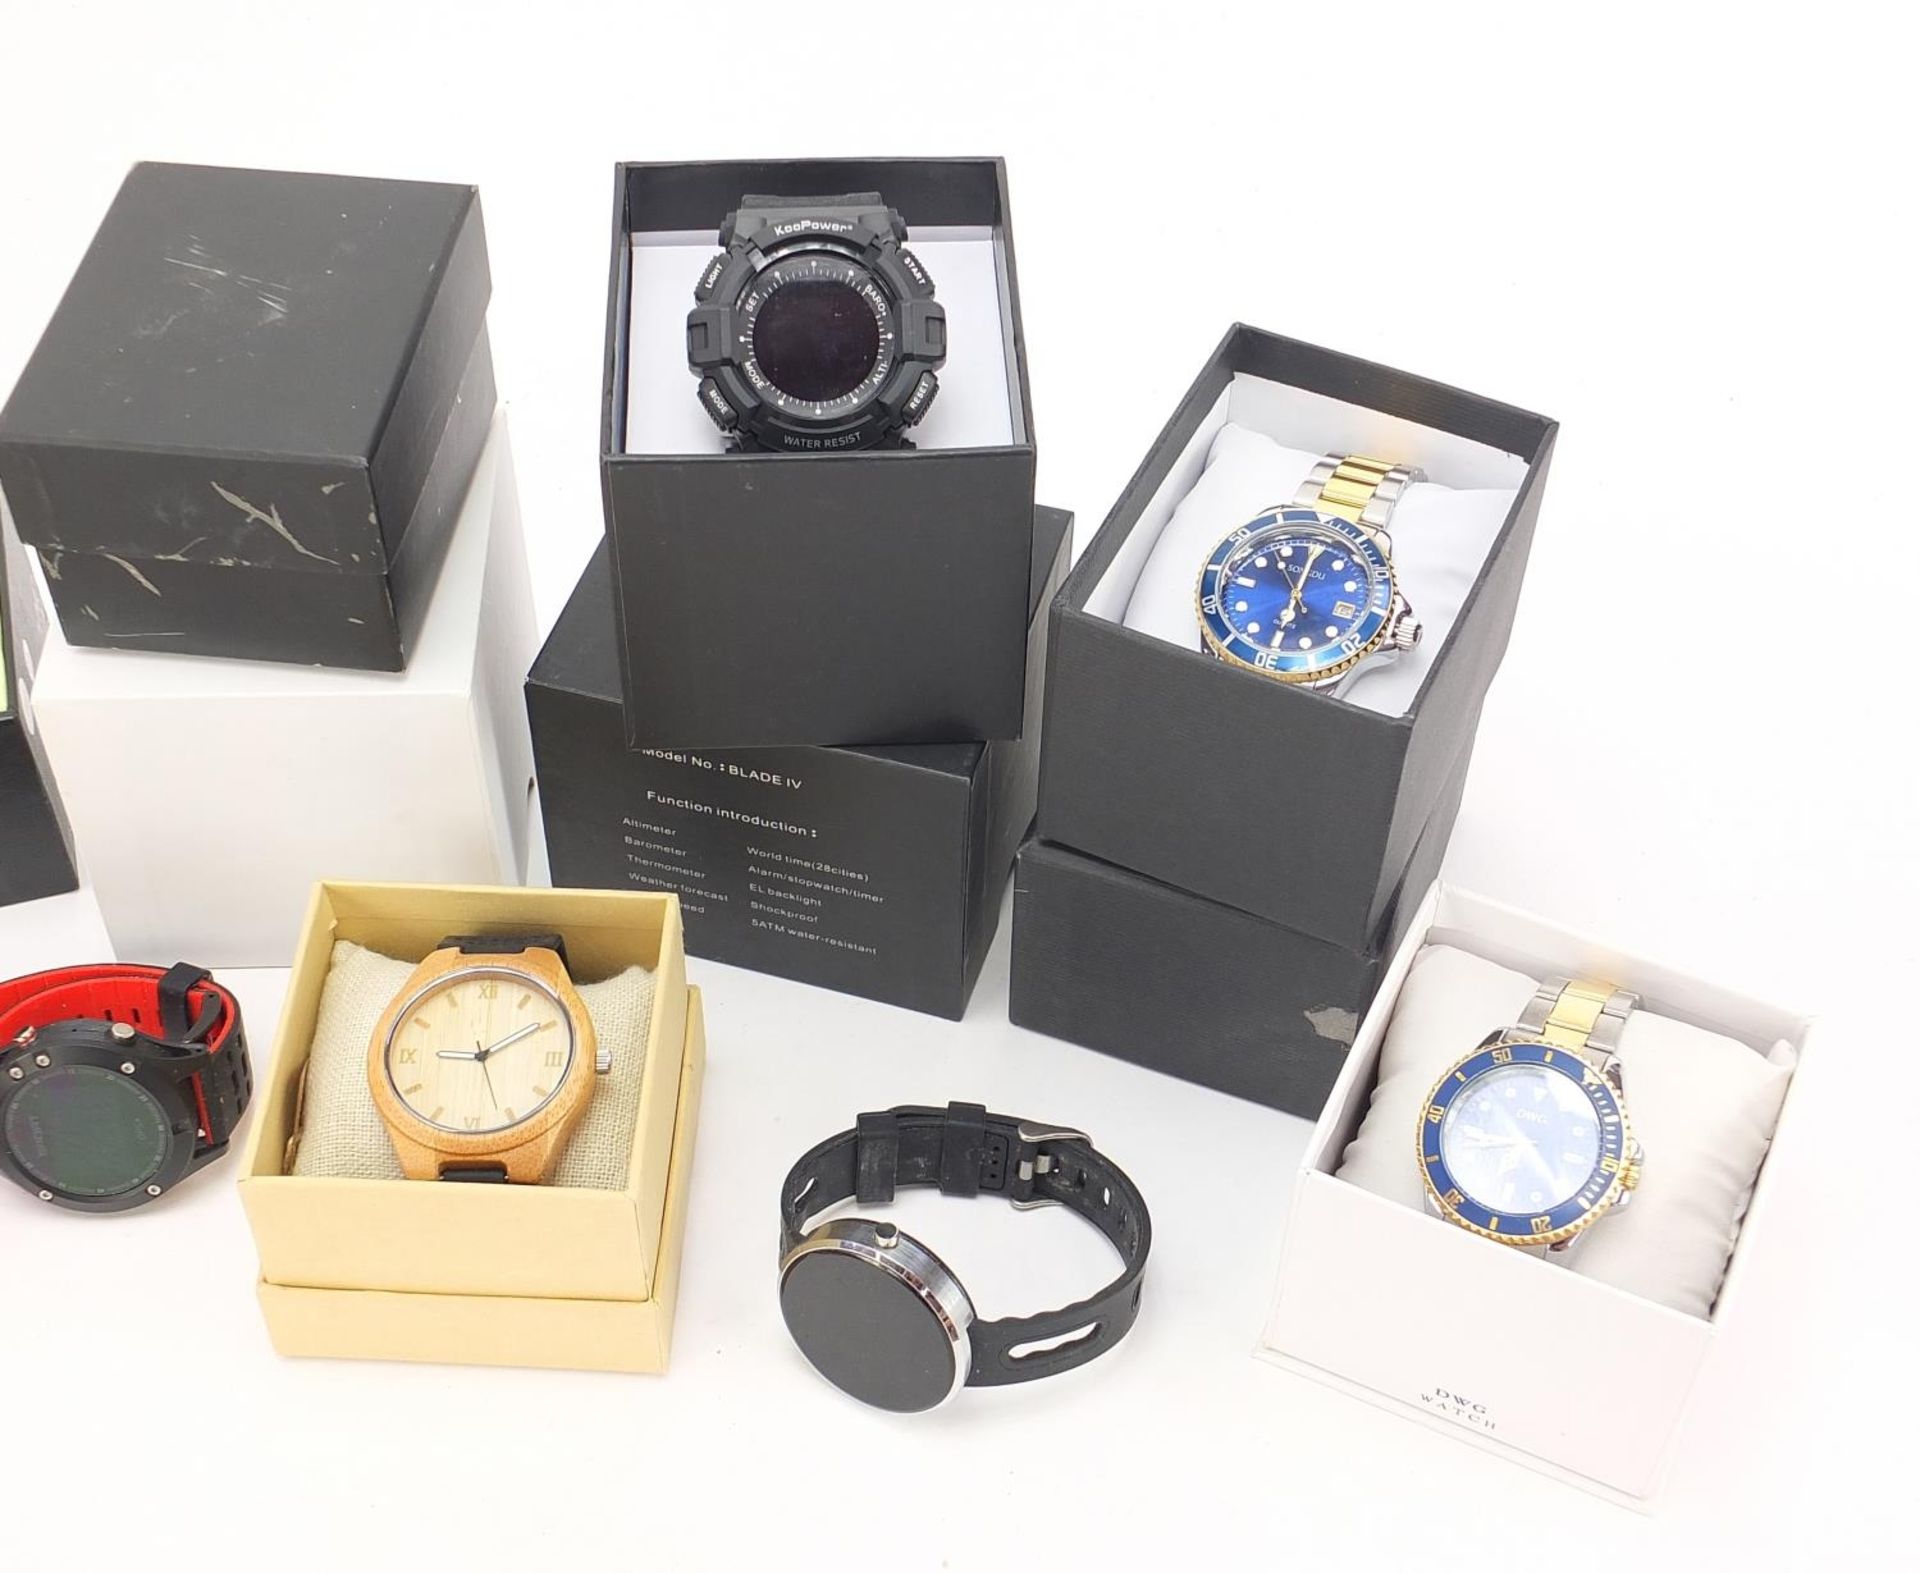 Thirteen gentlemen's wristwatches with boxes including android smart watch, DWG, Songdu, RGA - Image 3 of 3